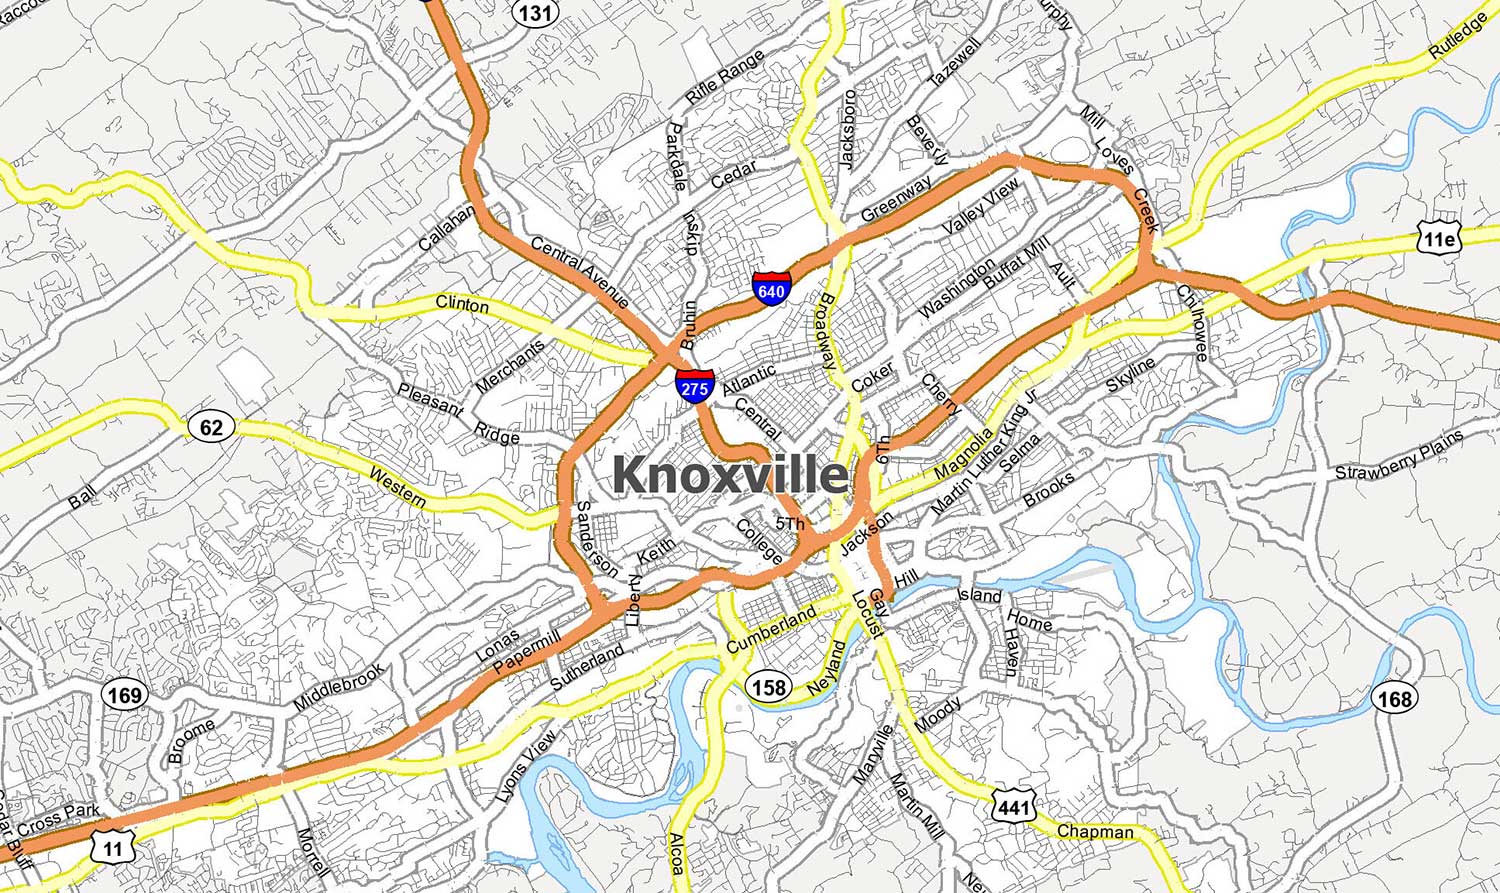 map-of-knoxville-tennessee-gis-geography